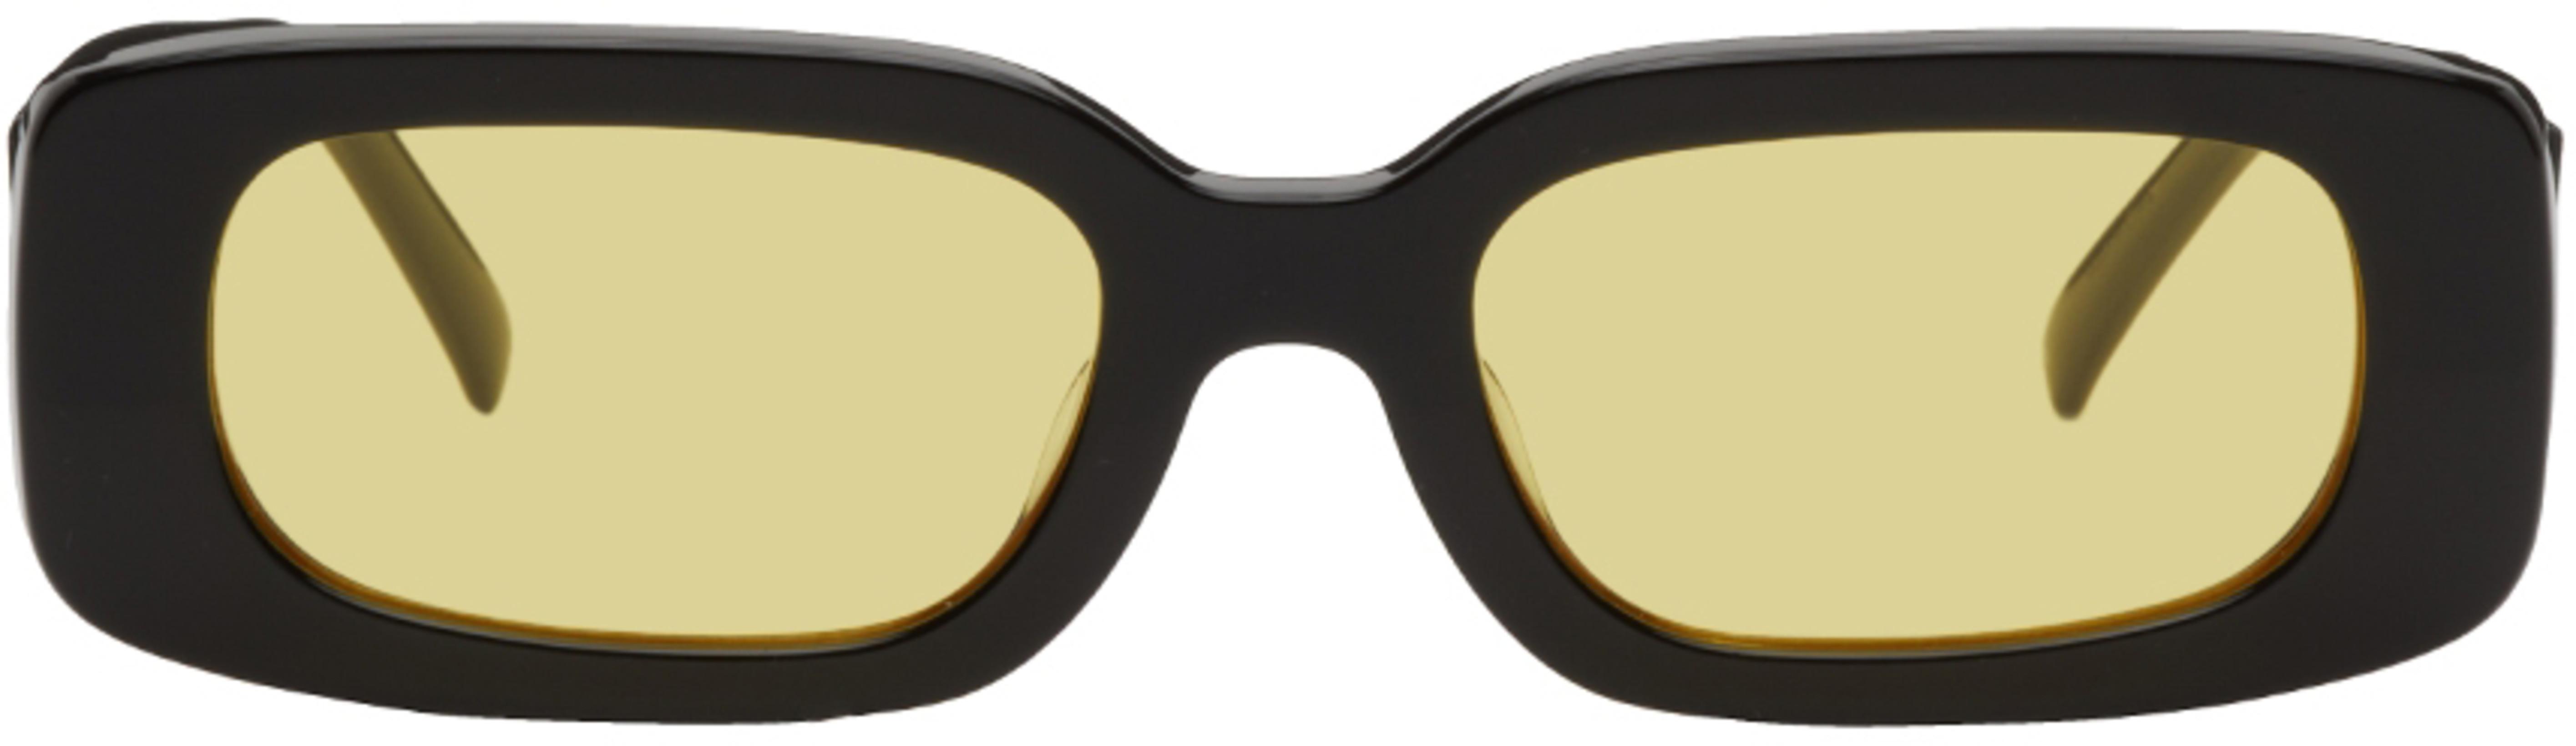 Black & Yellow Show & Tell Sunglasses by BONNIE CLYDE